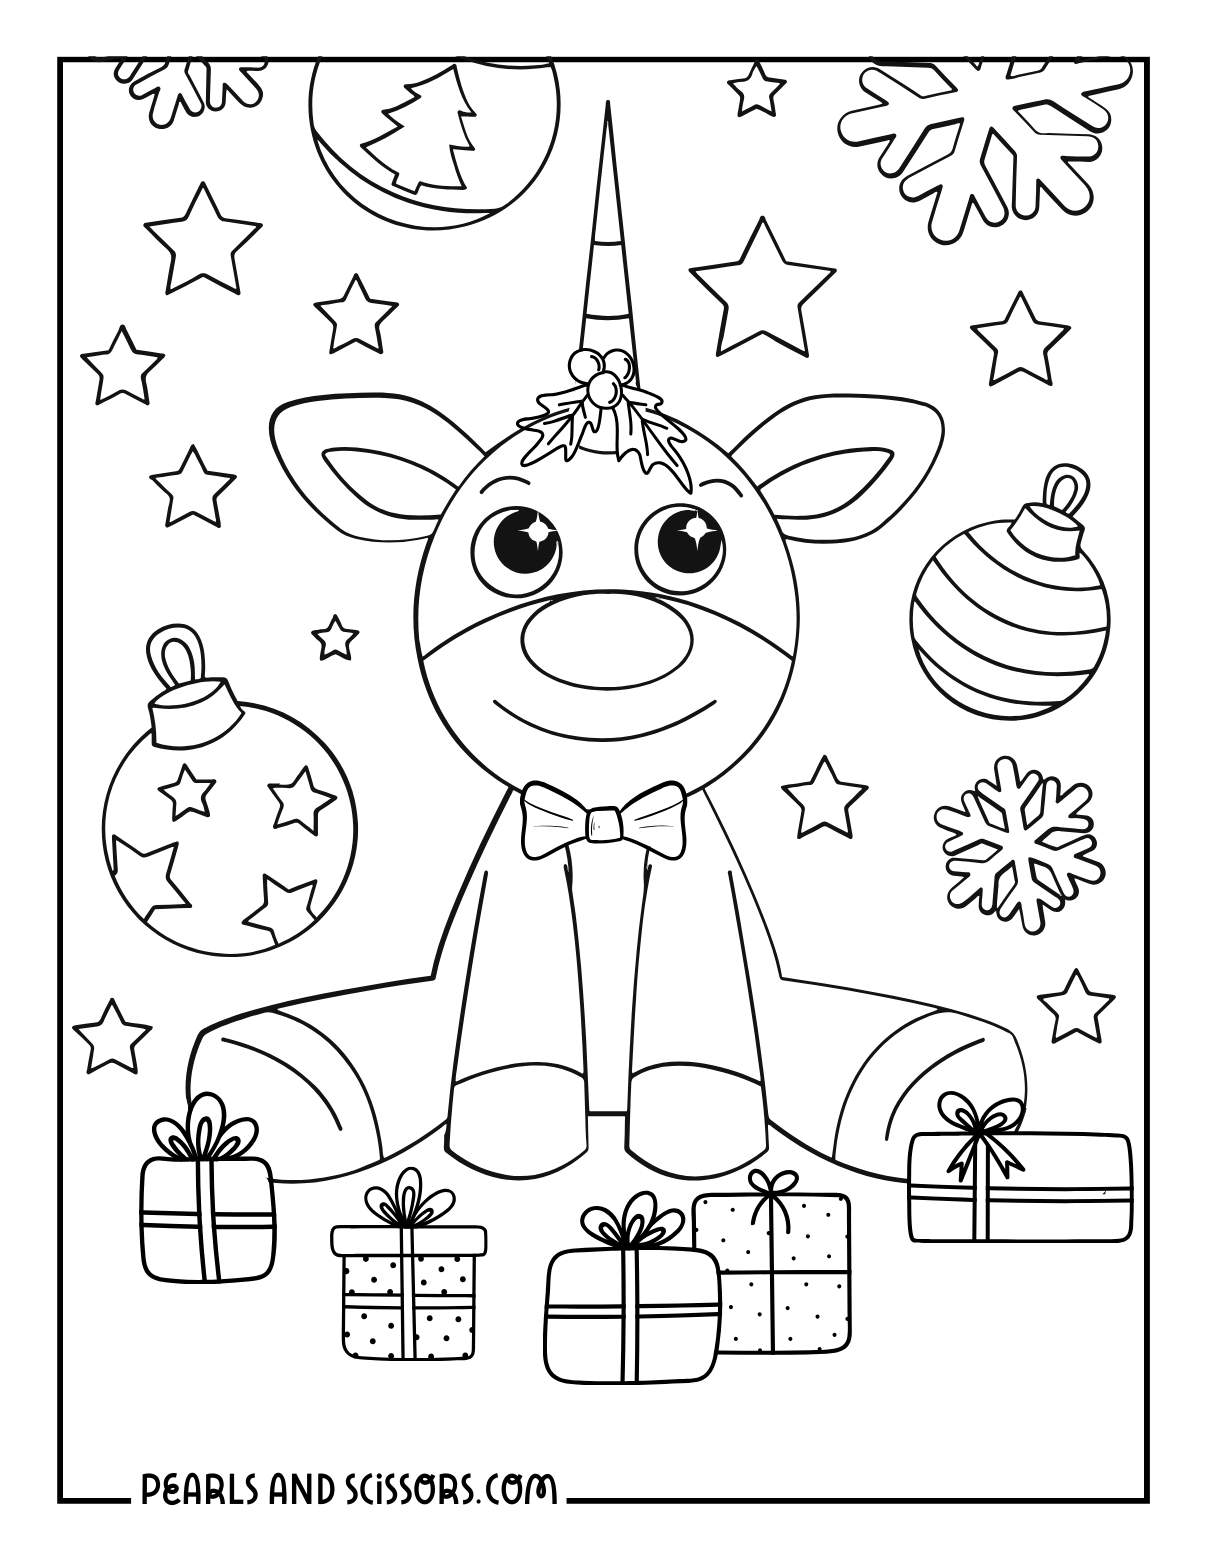 Unicorn opening christmas presents on christmas eve coloring page for kids.